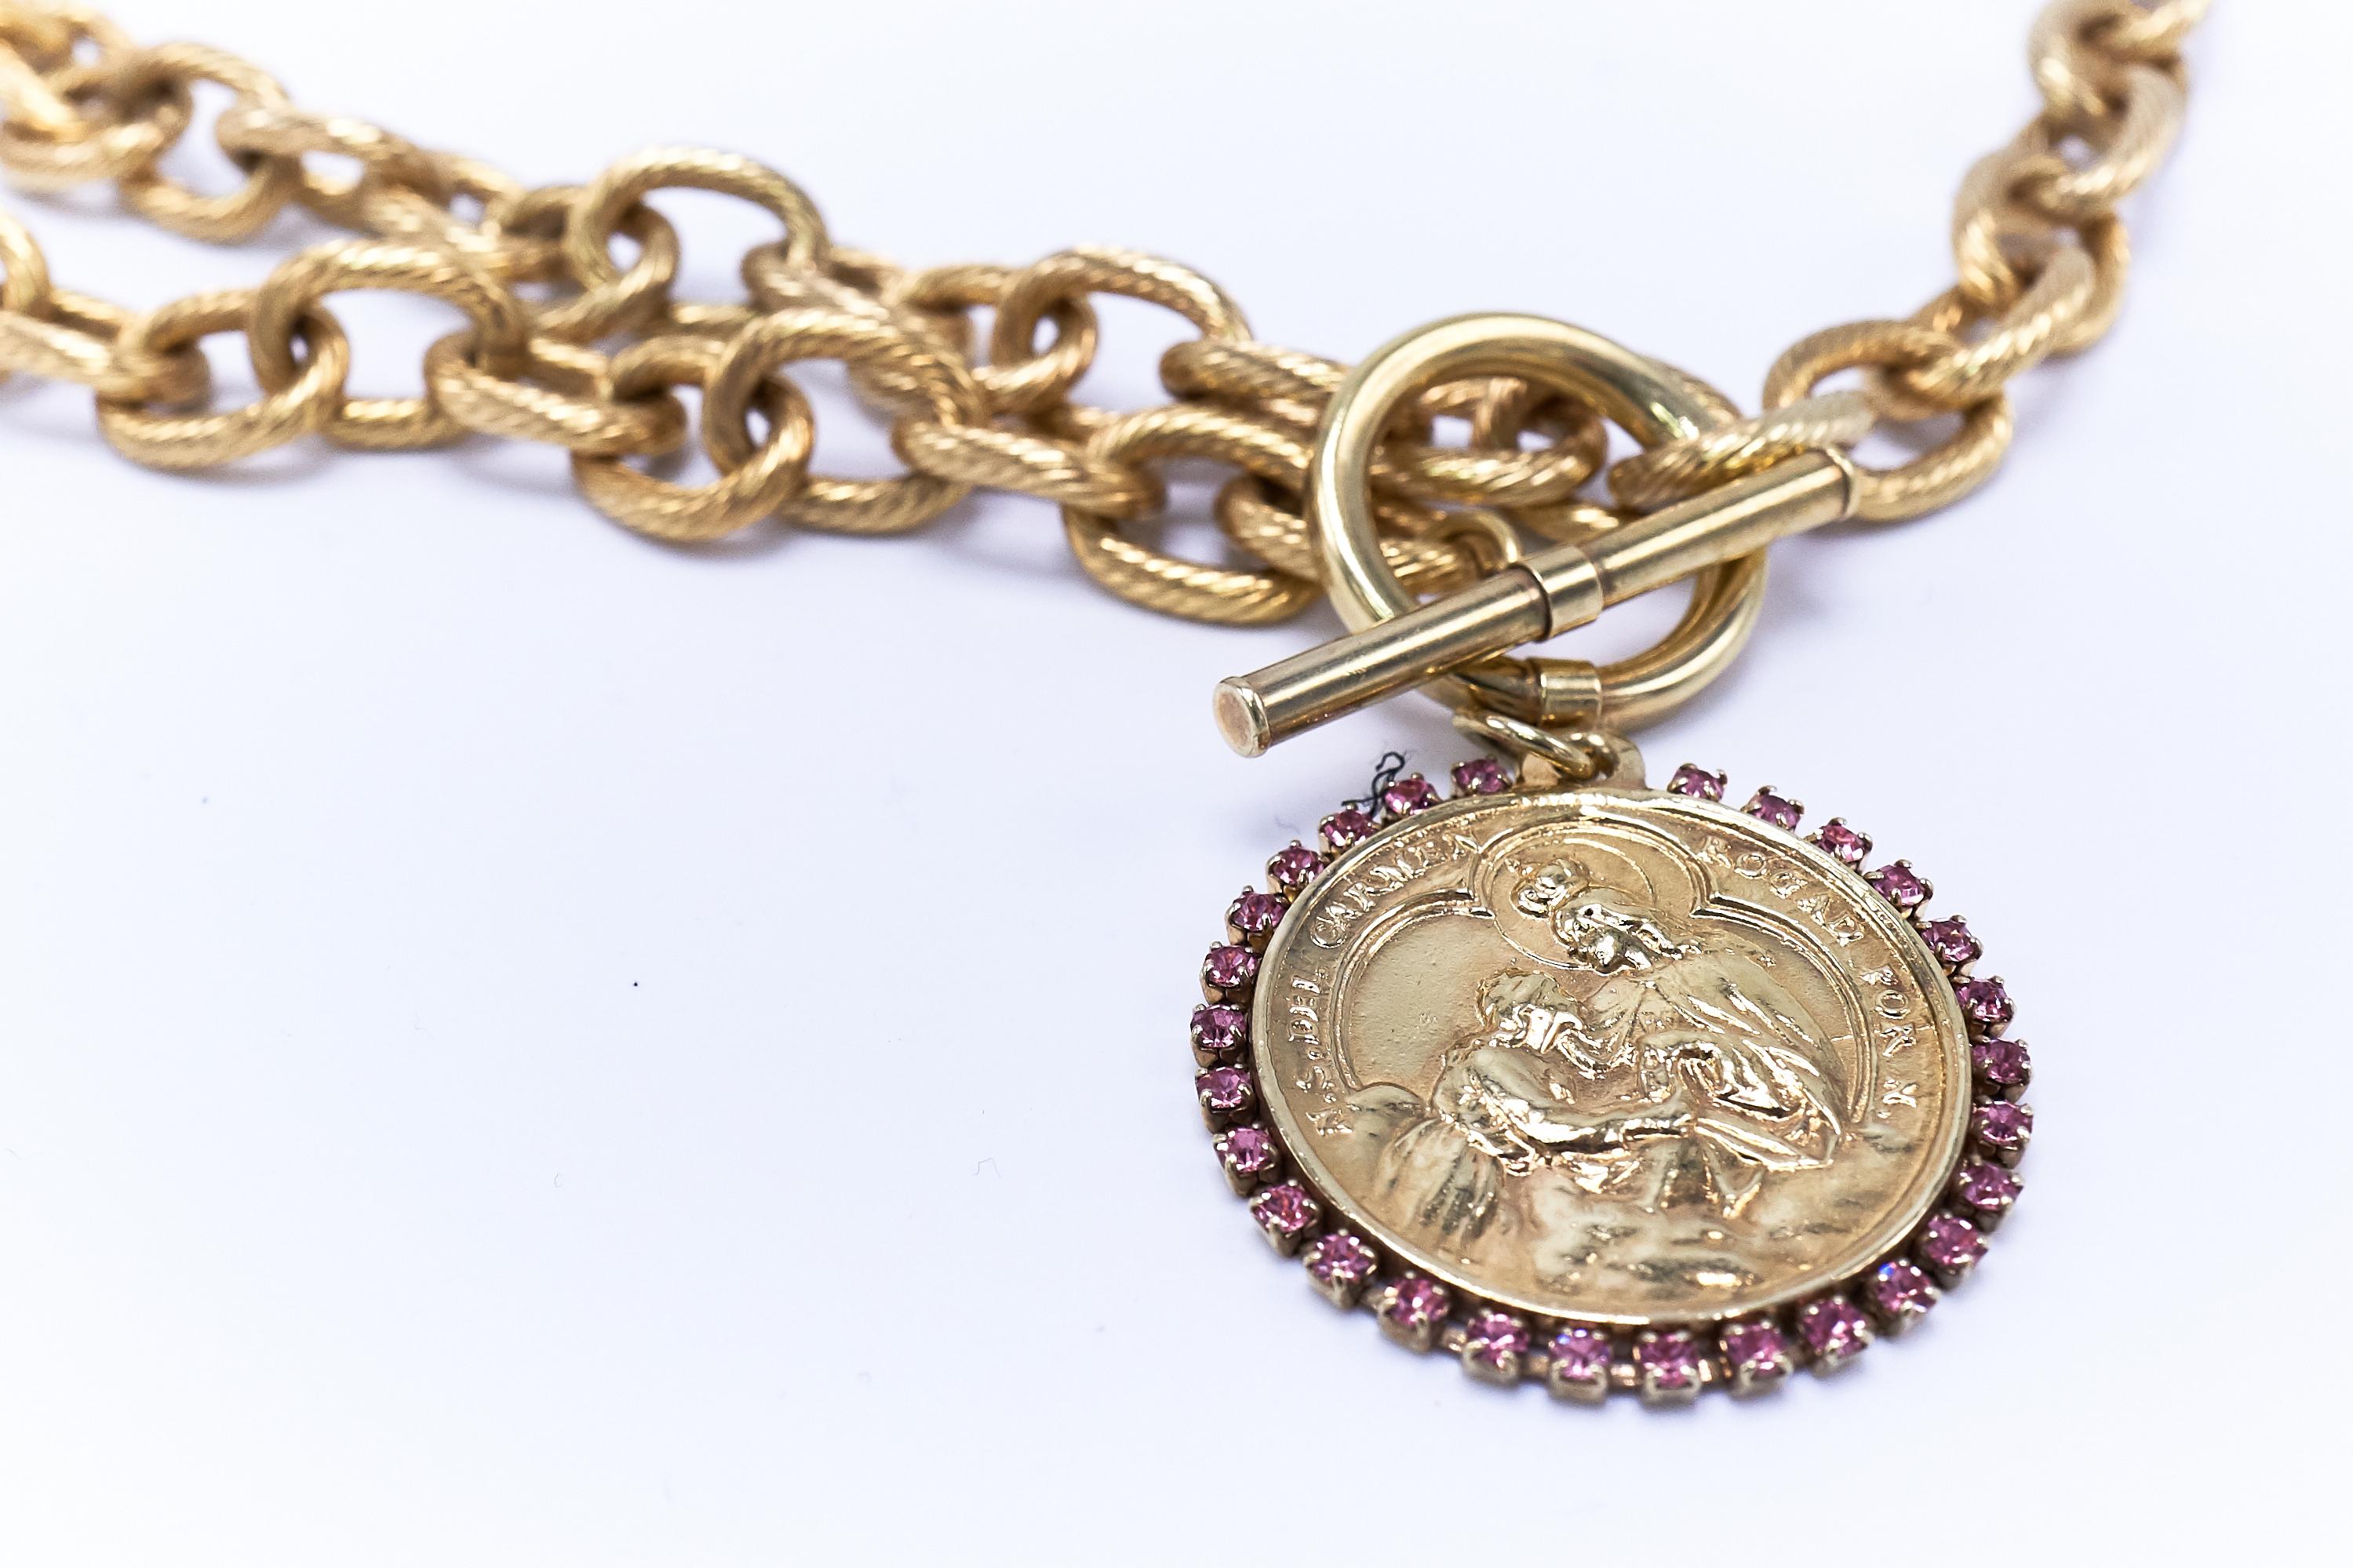 Choker Chain Necklace Medal Pink Crystal Virgin Mary Gold Plated J Dauphin

J DAUPHIN necklace 